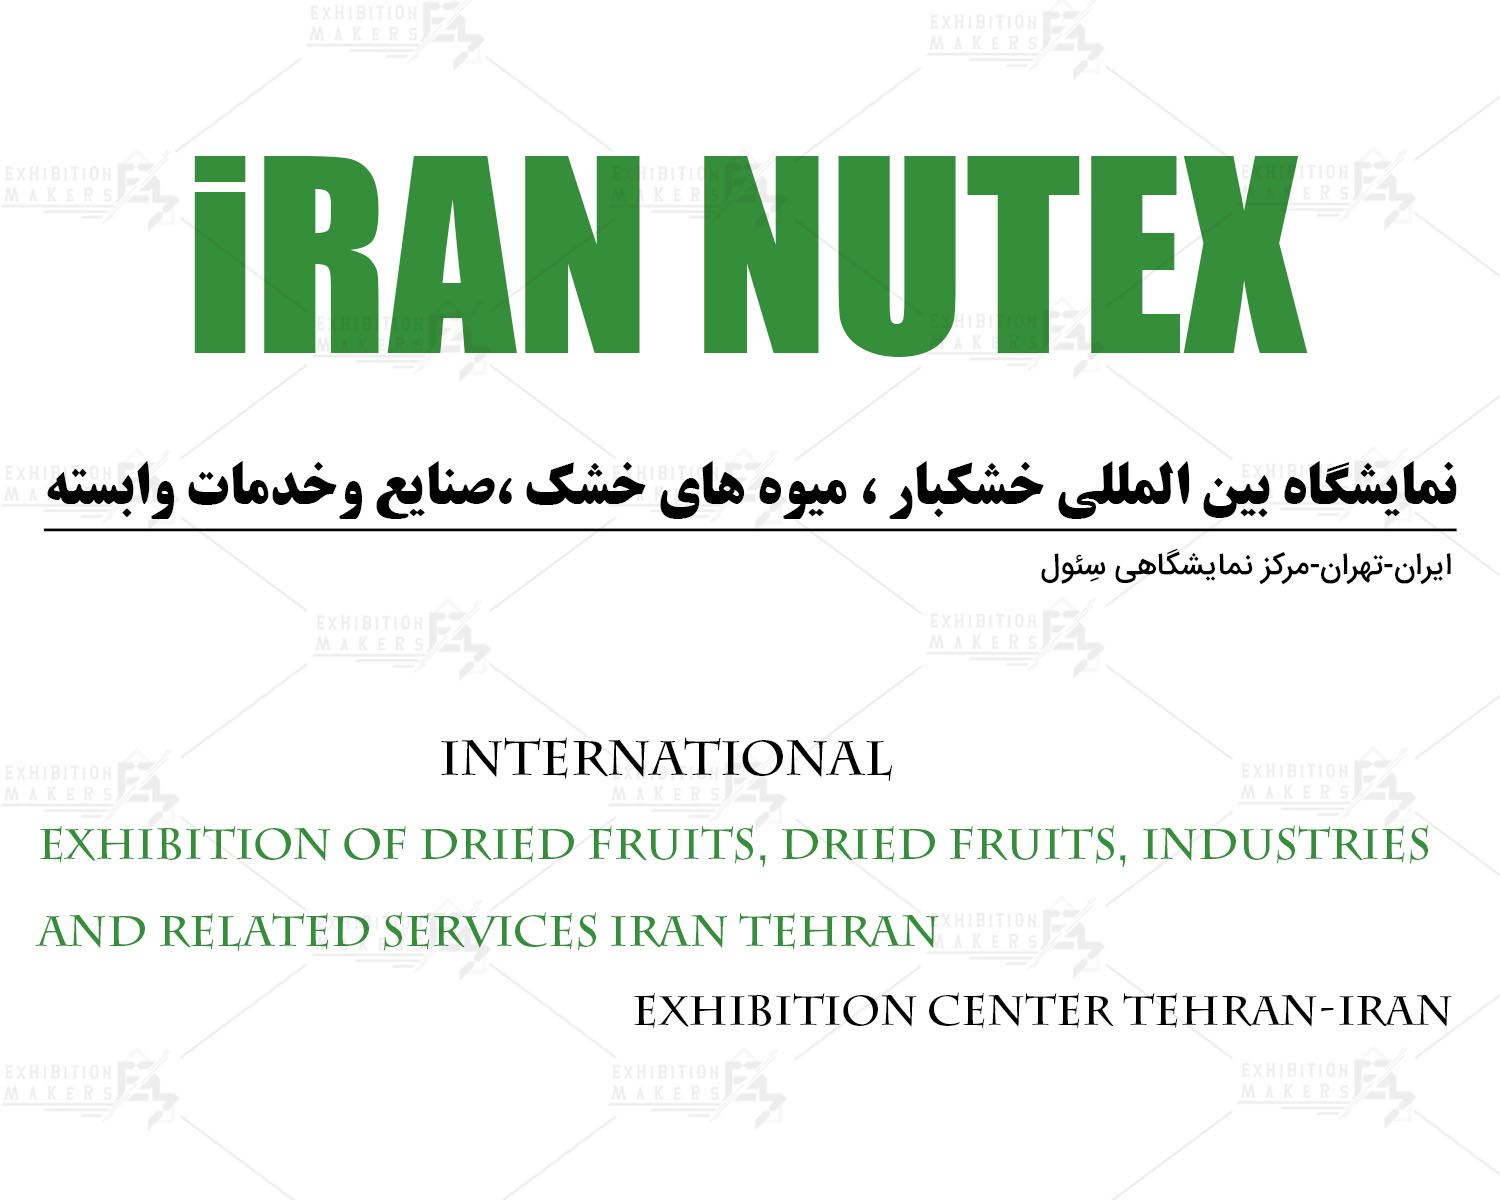 International Exhibition of Dried Fruits, Dried Fruits, Industries and Related Services Iran Tehran